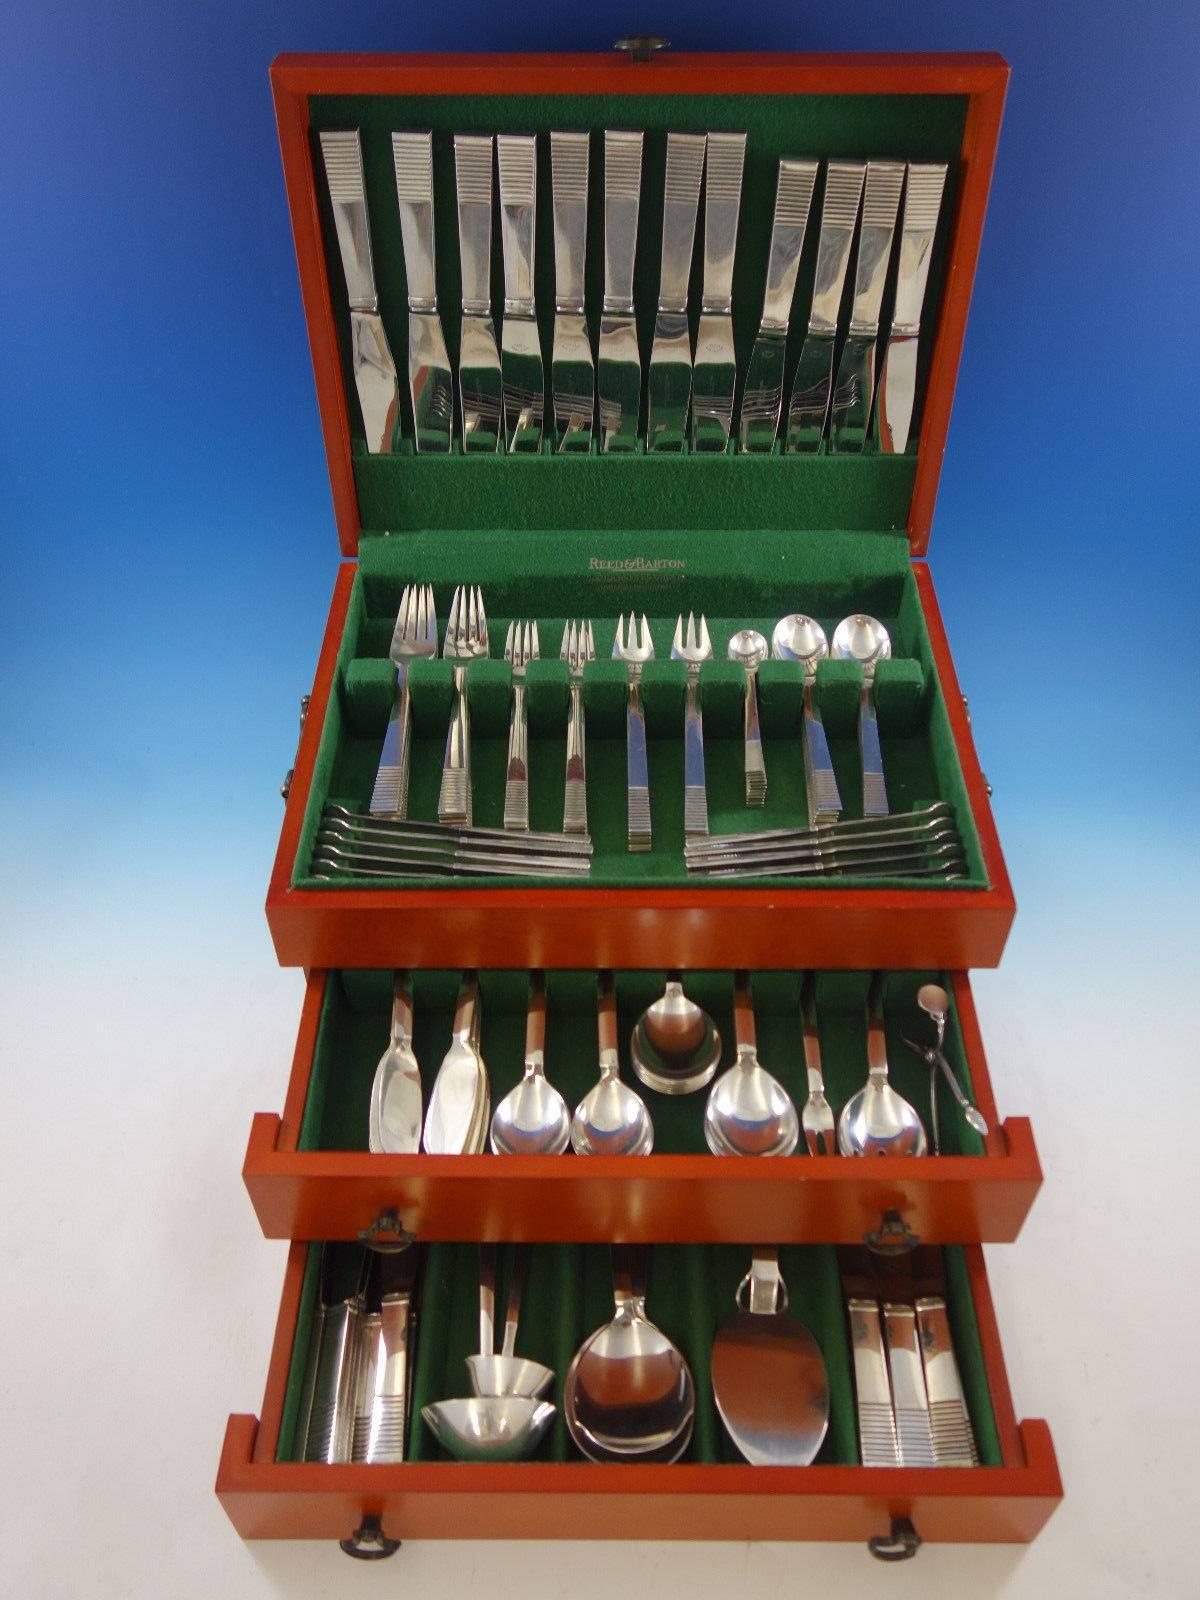 Parallel by Georg Jensen sterling silver flatware set, 141 pieces. This set includes: 12 dinner knives, 8 - 9 5/8